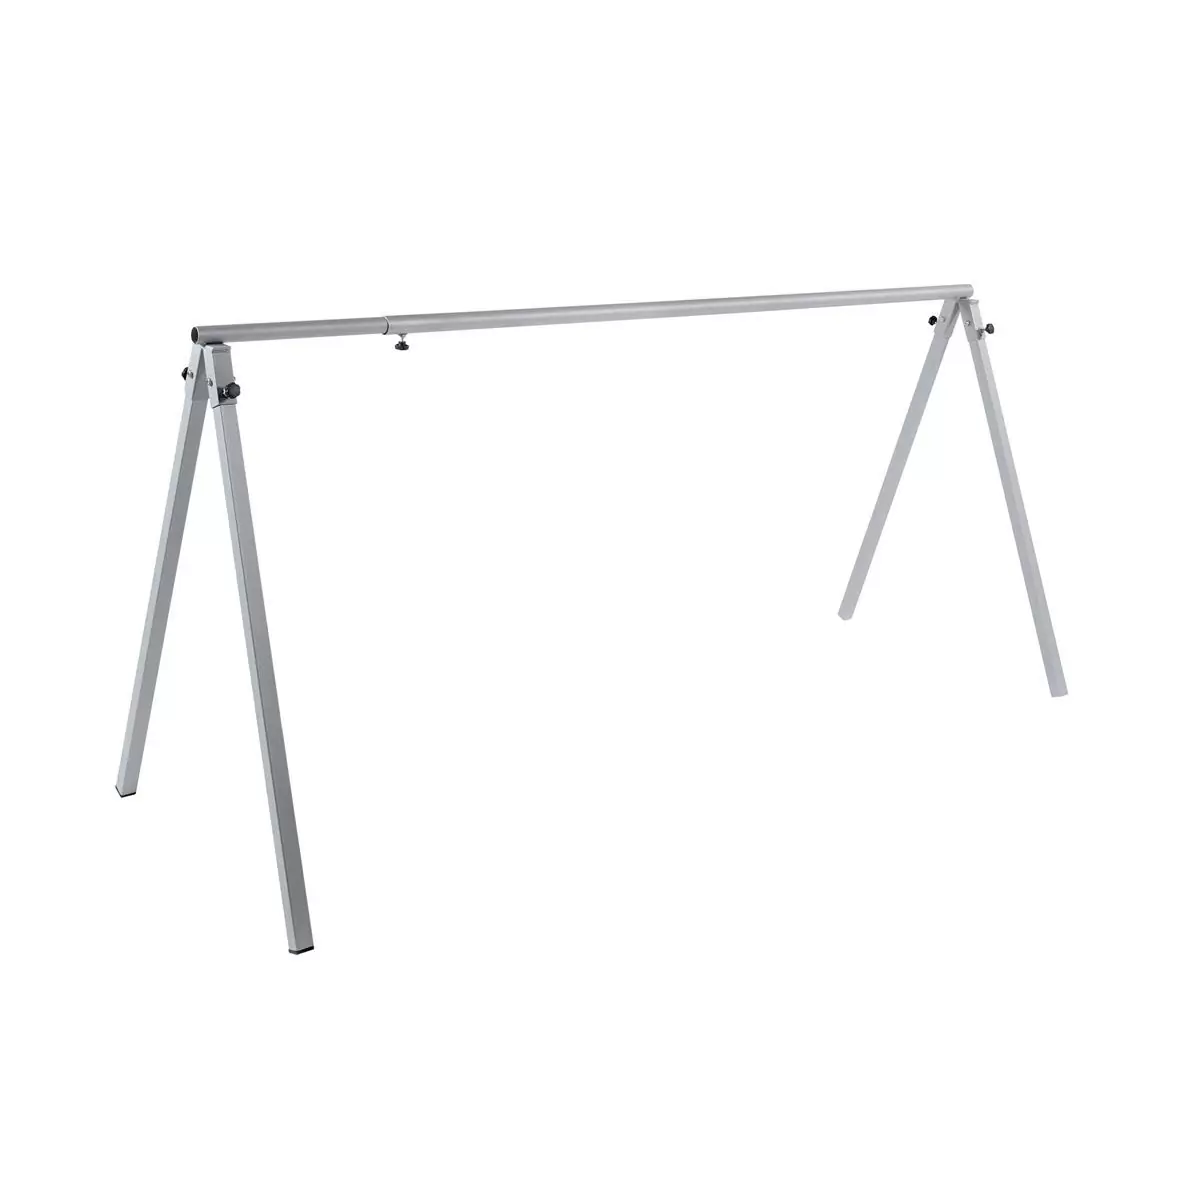 Display bike rack with 5 to 8 spaces adjustable from 2 to 3 meter Bag included - image